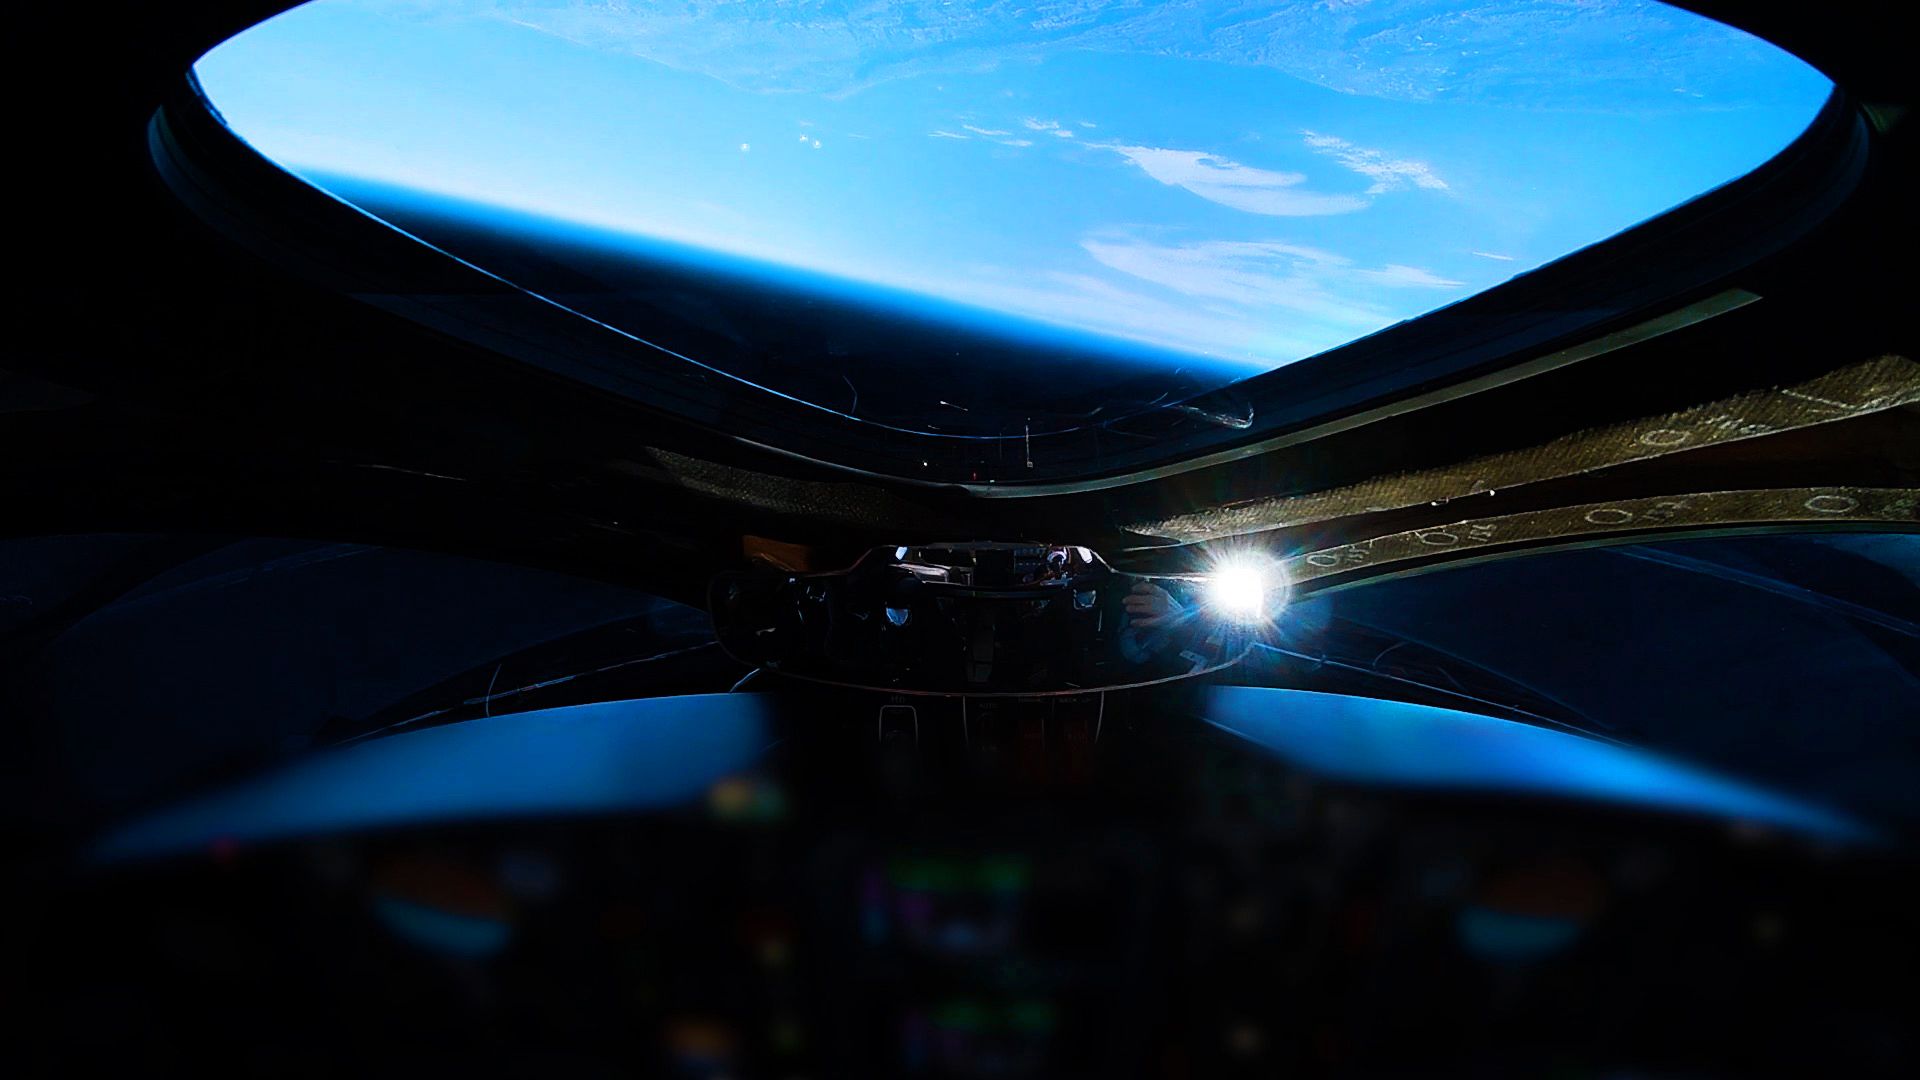 Image from the flight deck of Virgin Galactic's spaceship during the test flight